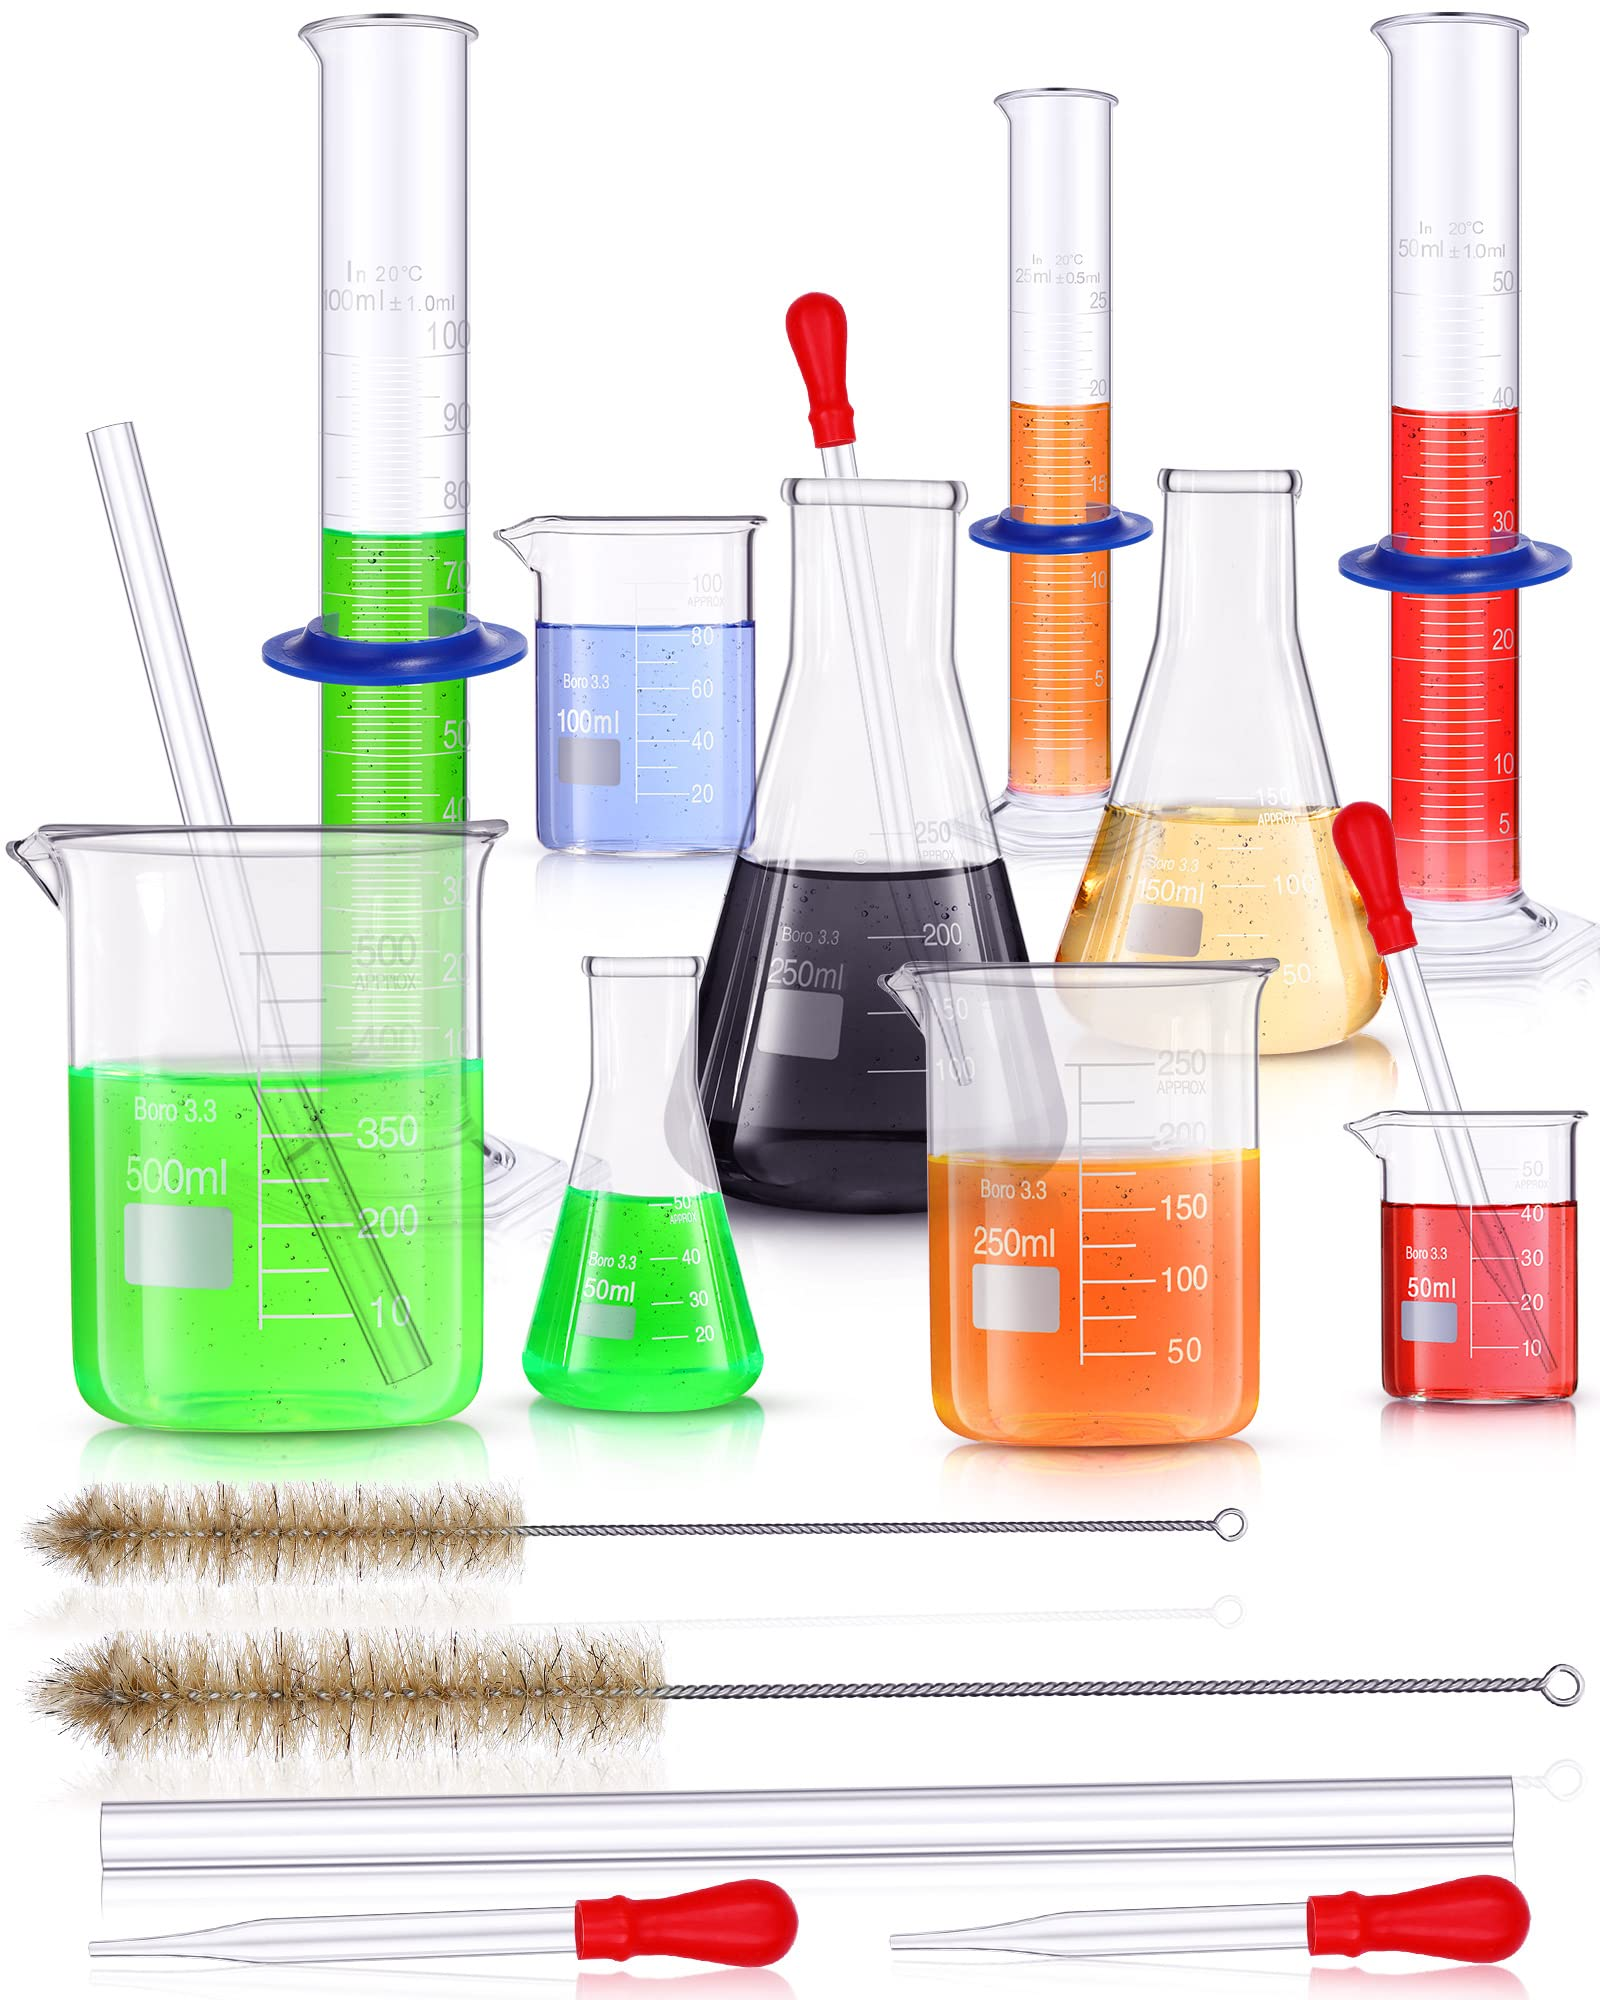 Various laboratory glassware including beakers, flasks, and test tubes